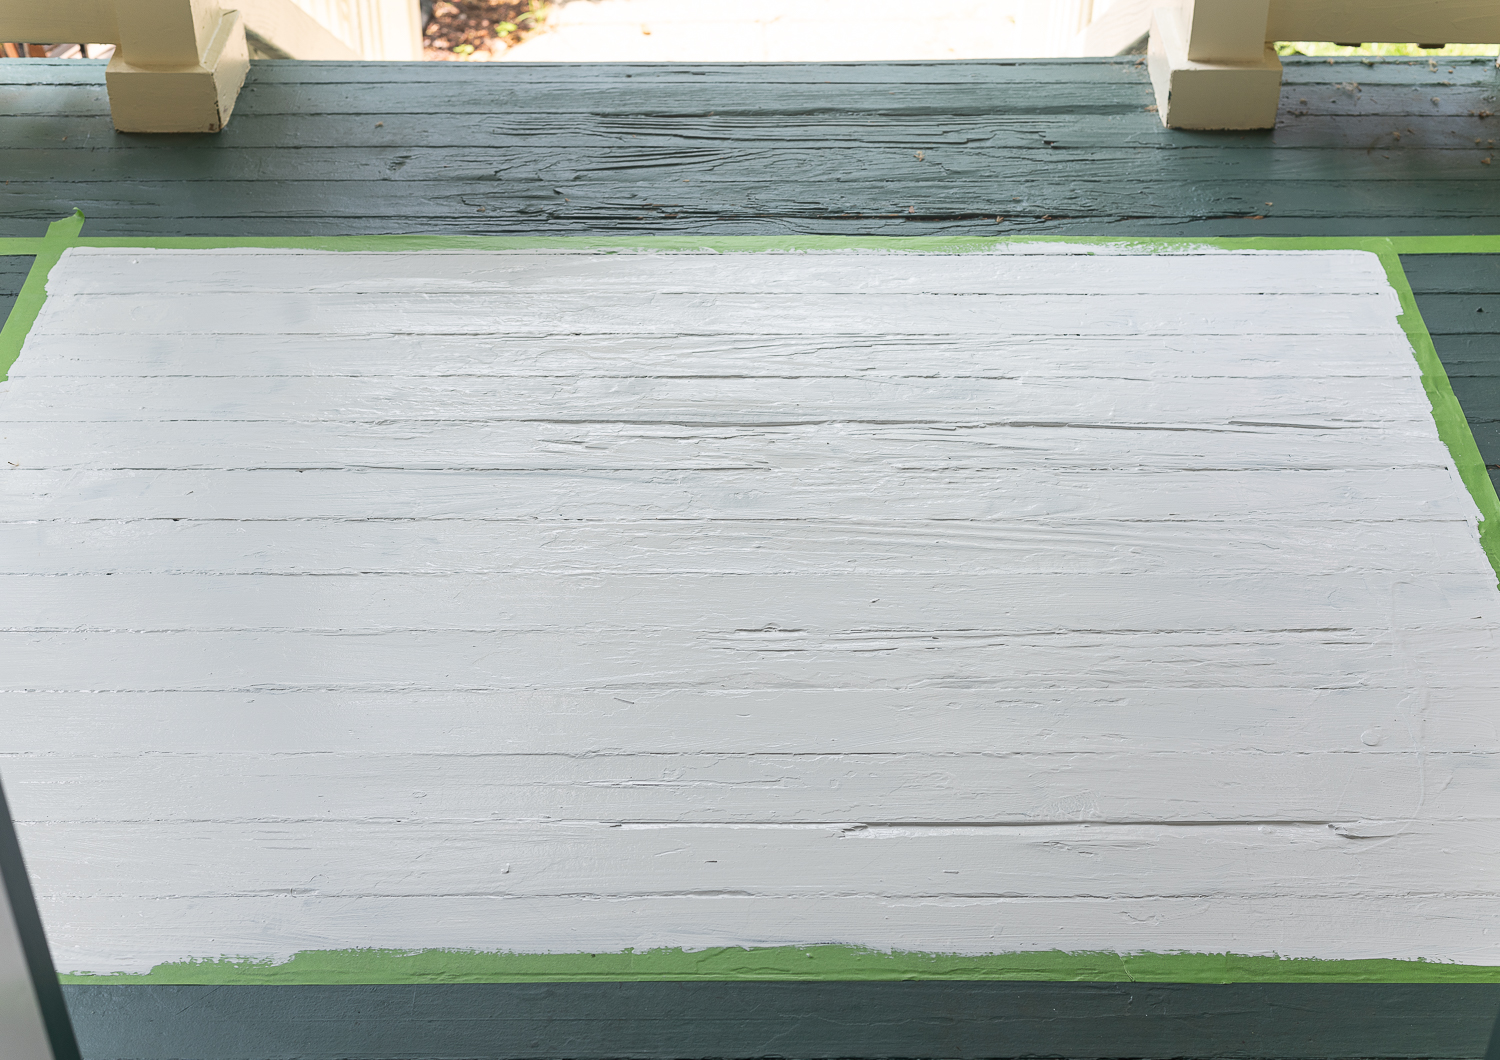 How to stencil a rug on your front porch with chalk paint. Chalk paint stencil how to. Painting rug on porch landing.